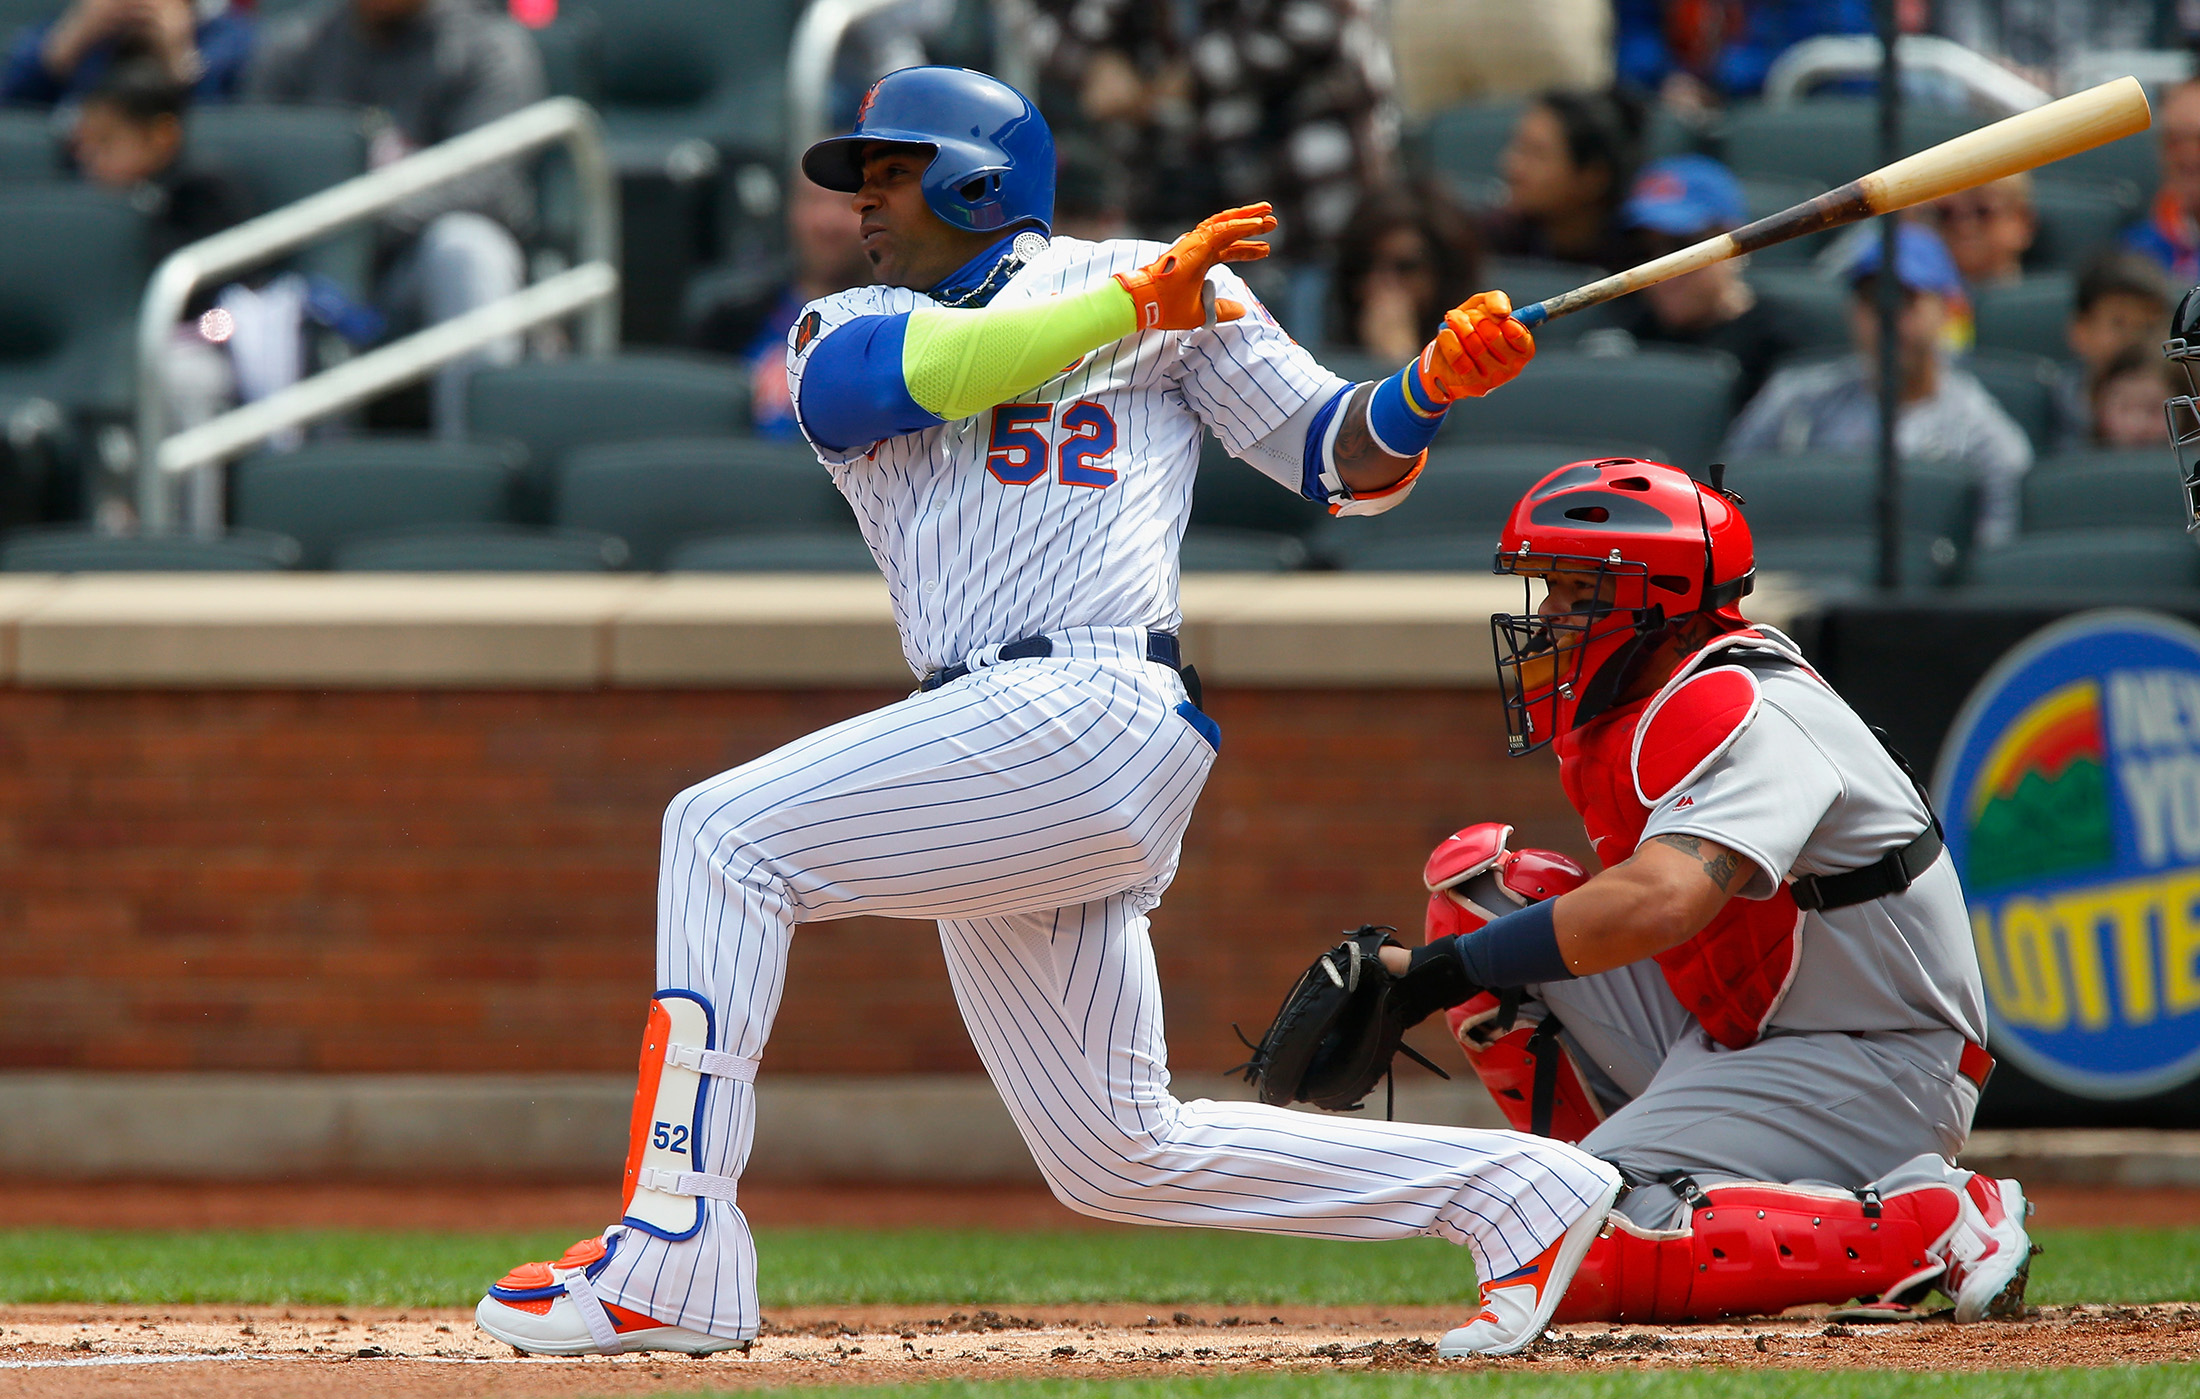 Mets' Yoenis Cespedes latest MLB player to opt out of season due